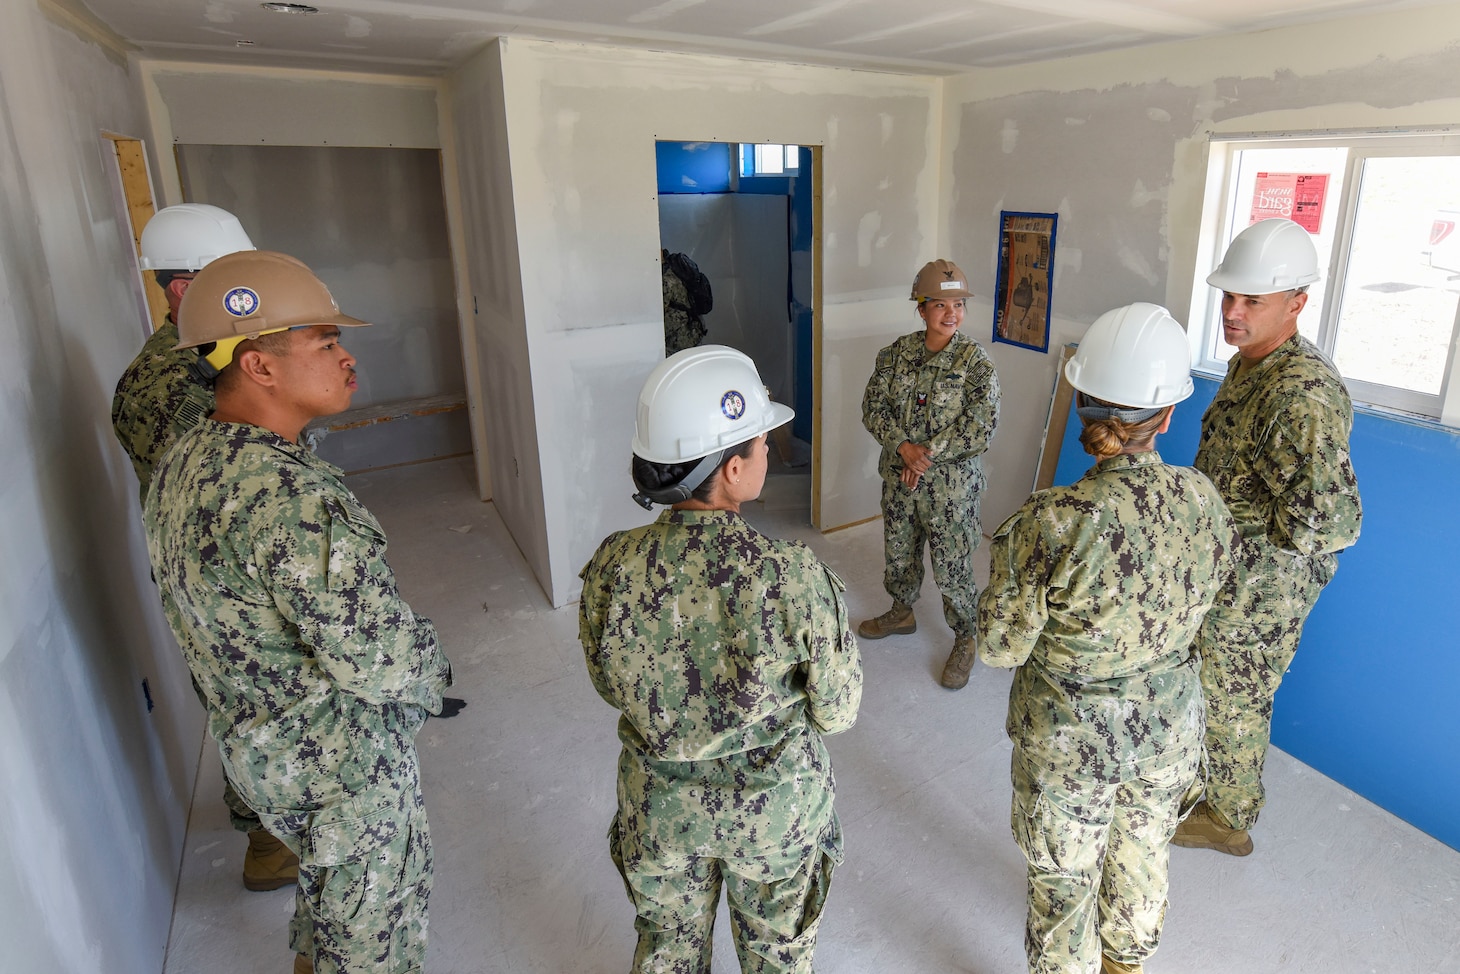 GALLUP, N.M. (June 15, 2023) Navy Reserve Sailors pose for a group photo in front of a newly constructed home they built as a charitable contribution and training opportunity in partnership with the Southwest Indian Foundation. The home's construction served to educate Seabees in various practical construction techniques needed for mission readiness while fulfilling the needs of a community partner as part of the Department of Defense's Innovative Readiness Training (IRT) program. Representatives from Naval Mobile Construction Battalion (NMCB) 18, FIRST Naval Construction Regiment (FIRST NCR) and Southwest Indian Foundation are depicted.